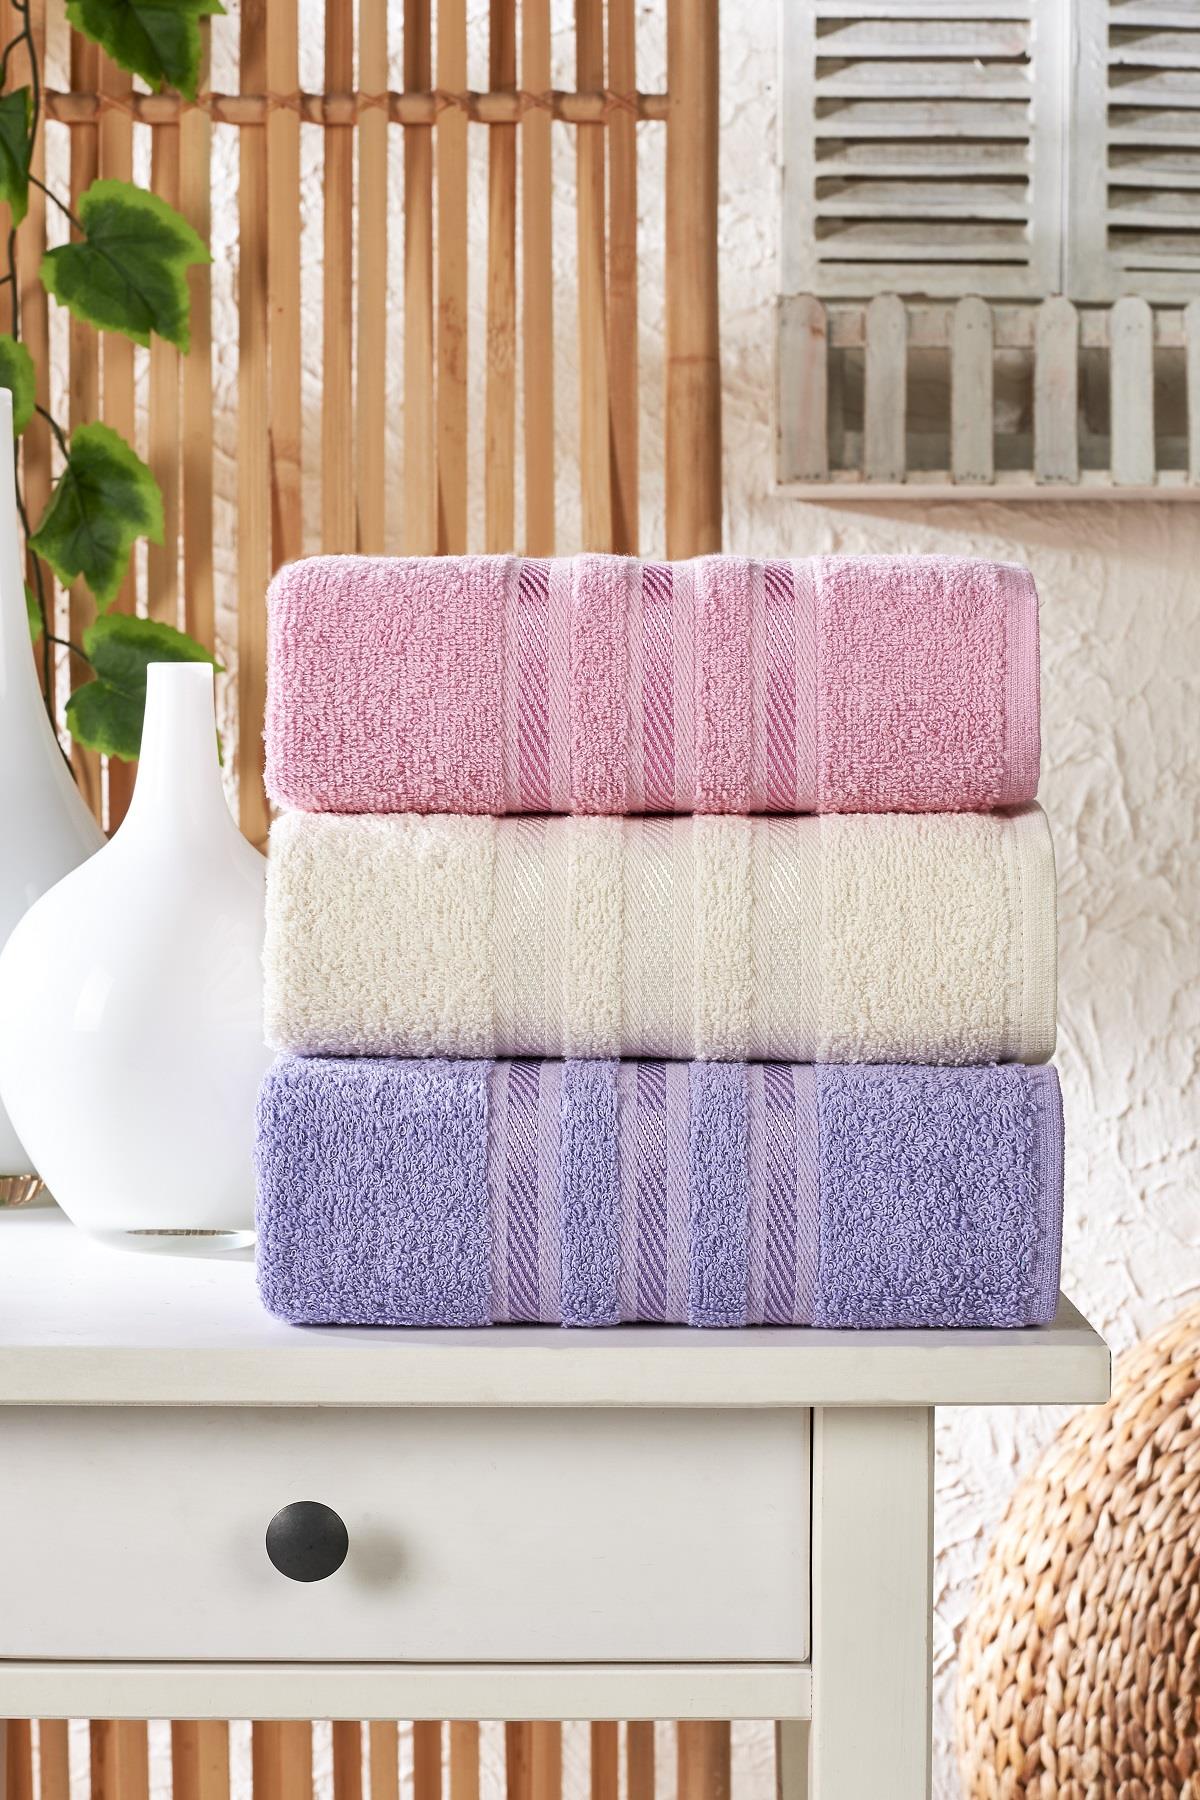 Elevate Your Home with Semecca's Lia Soft 3-Piece Towel Set - 100% Cotton Luxury